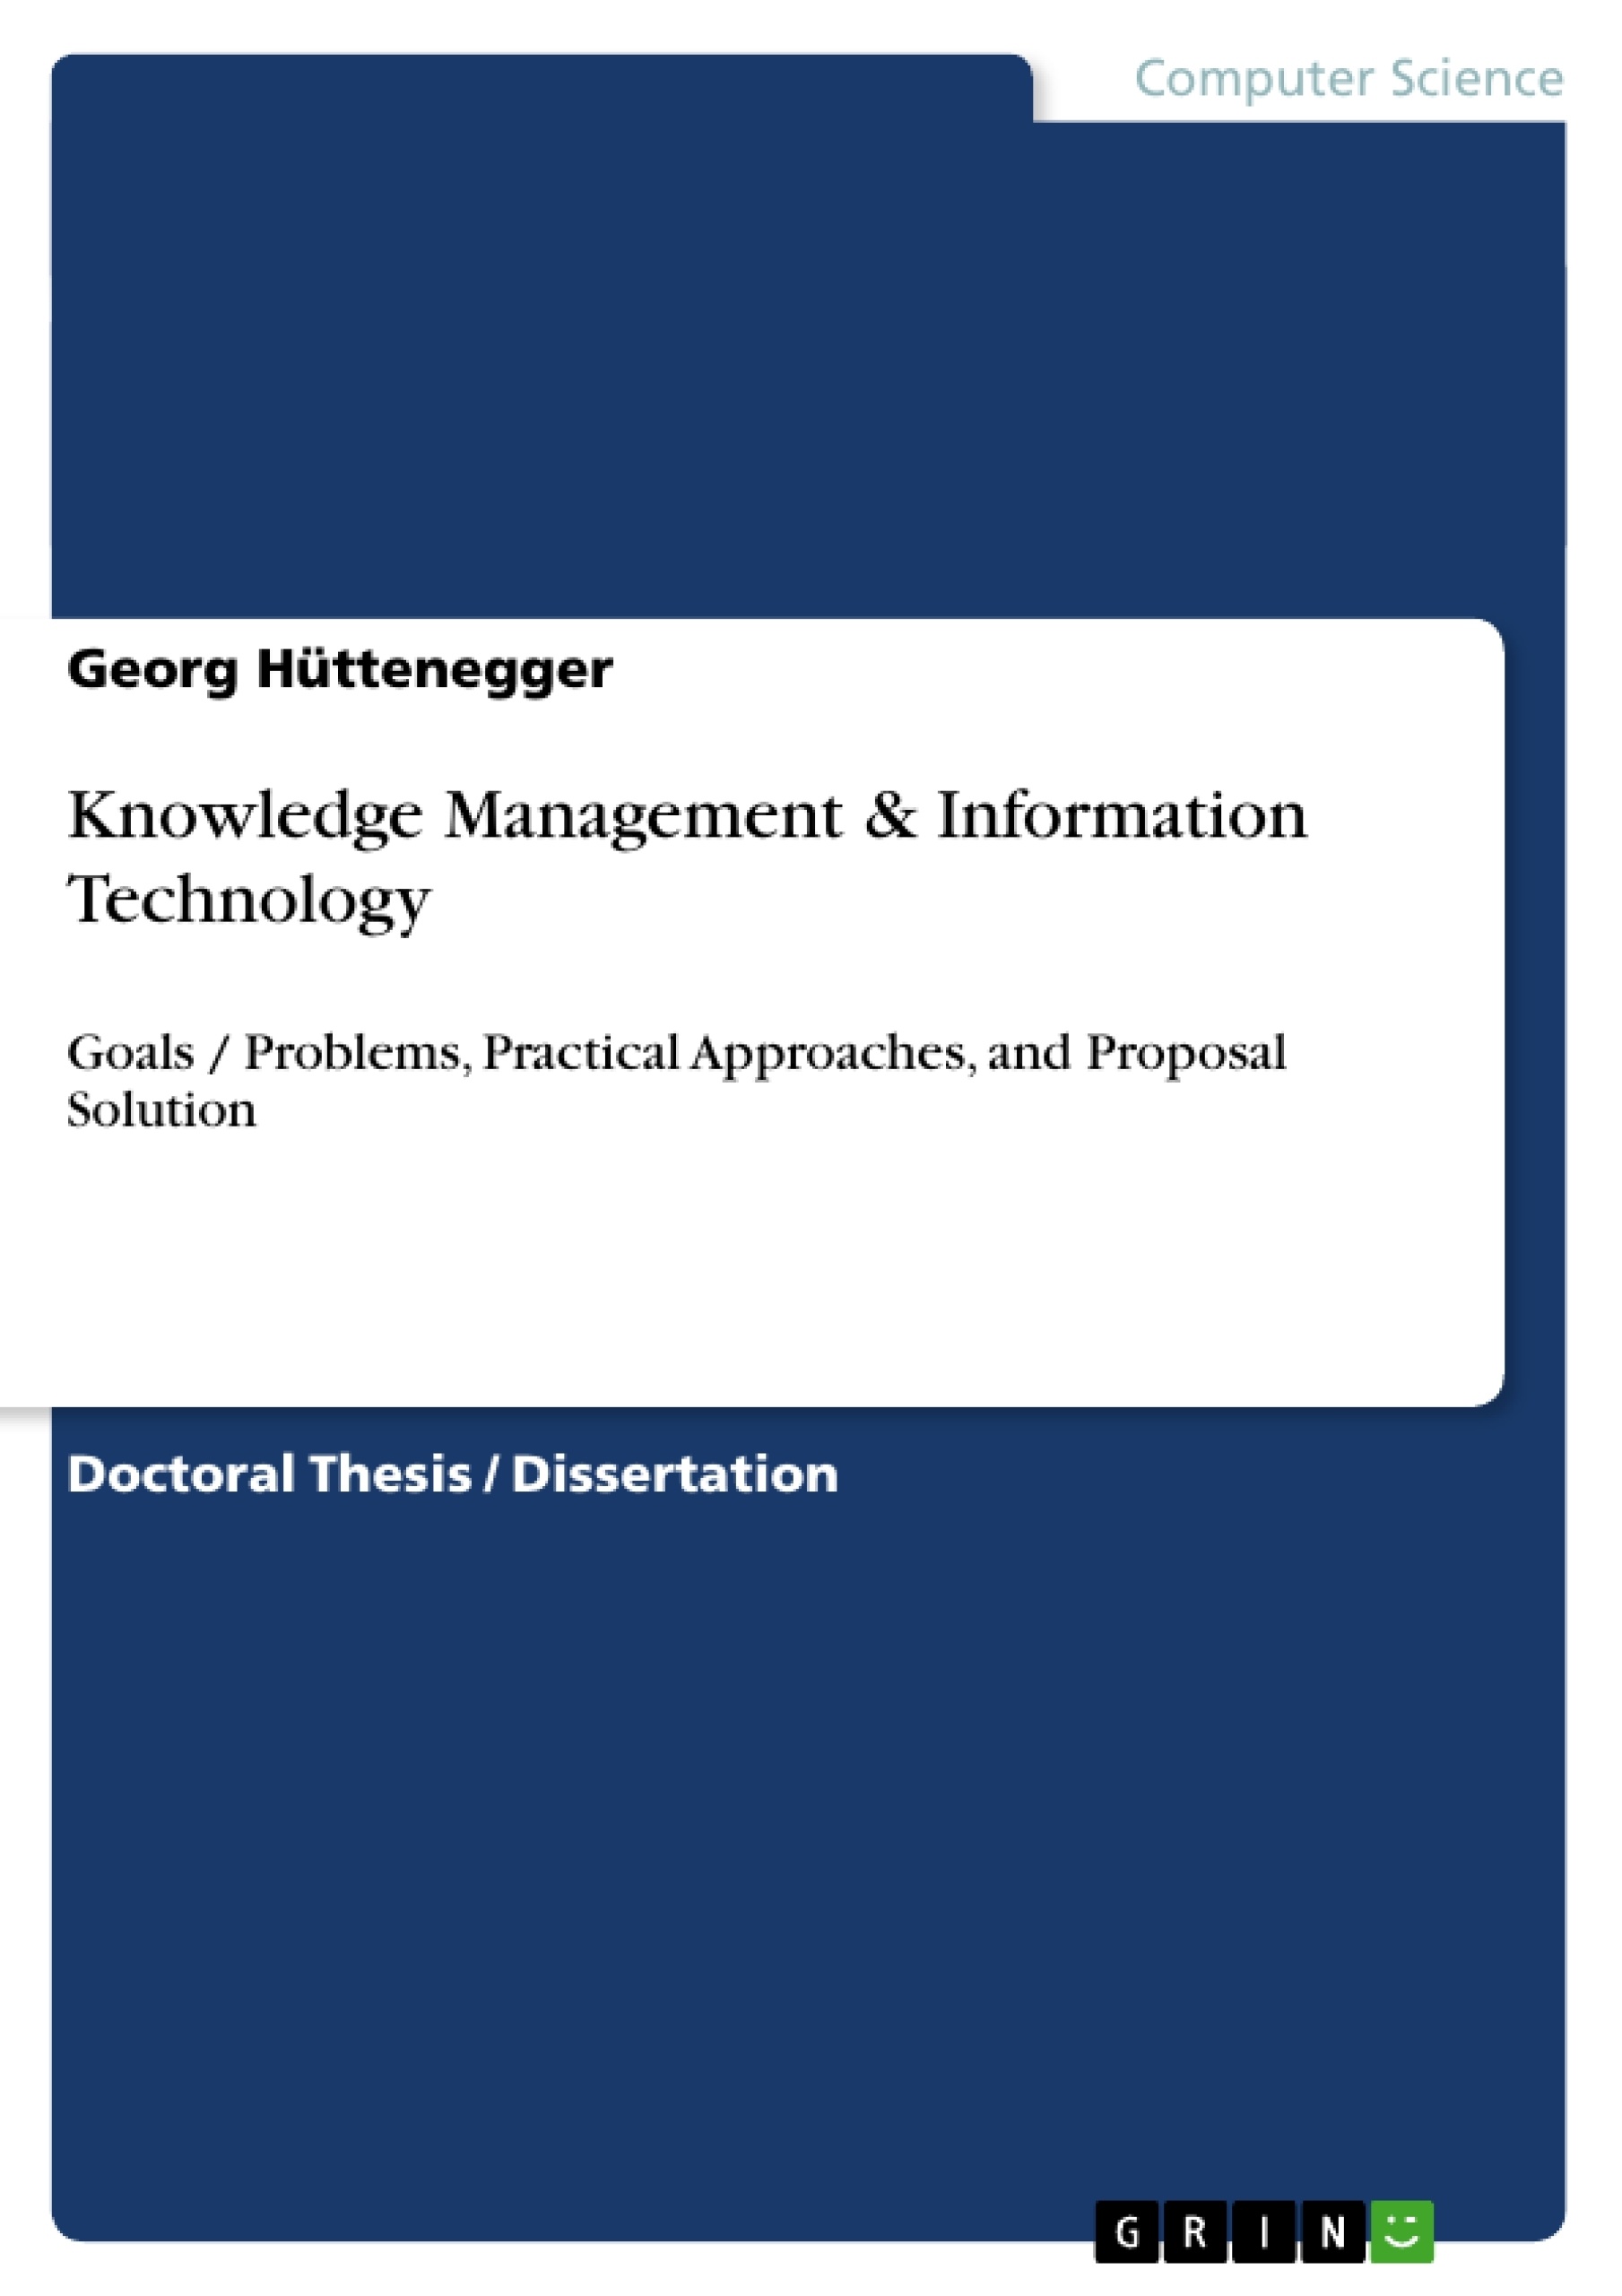 Title: Knowledge Management & Information Technology